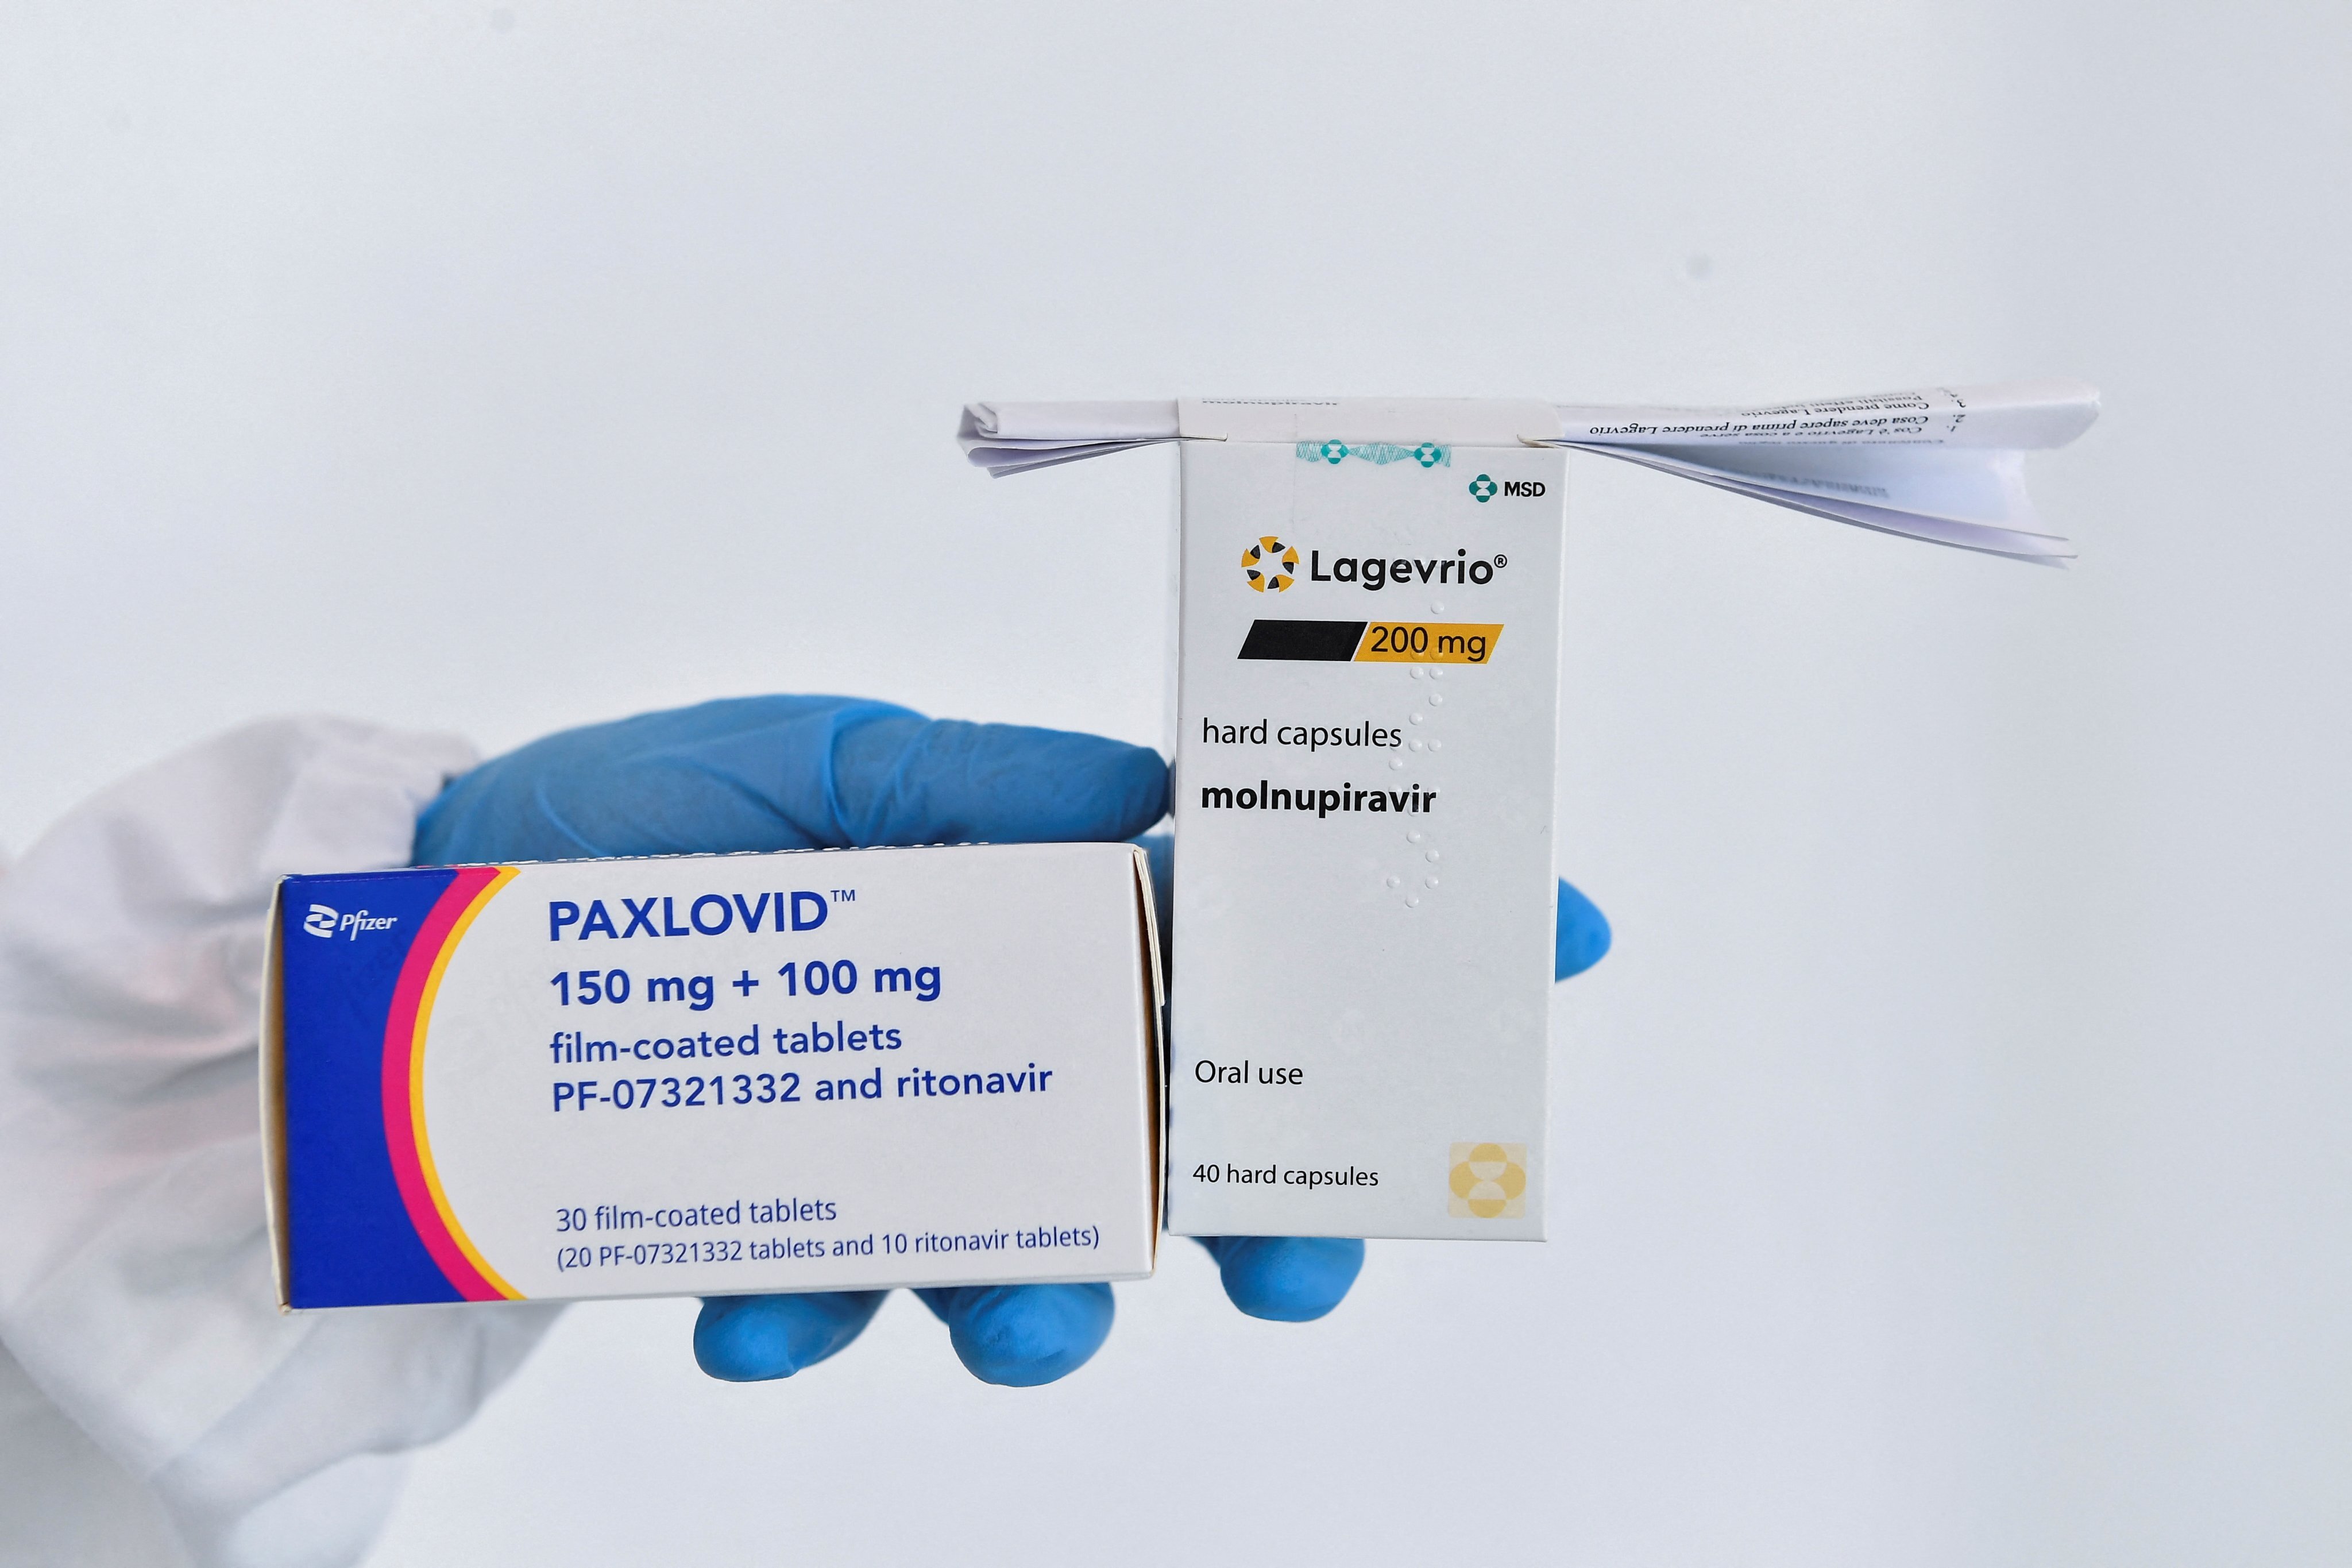 Paxlovid and Molnupiravir are being used to treat Covid-19 patients in Hong Kong. Photo: Reuters